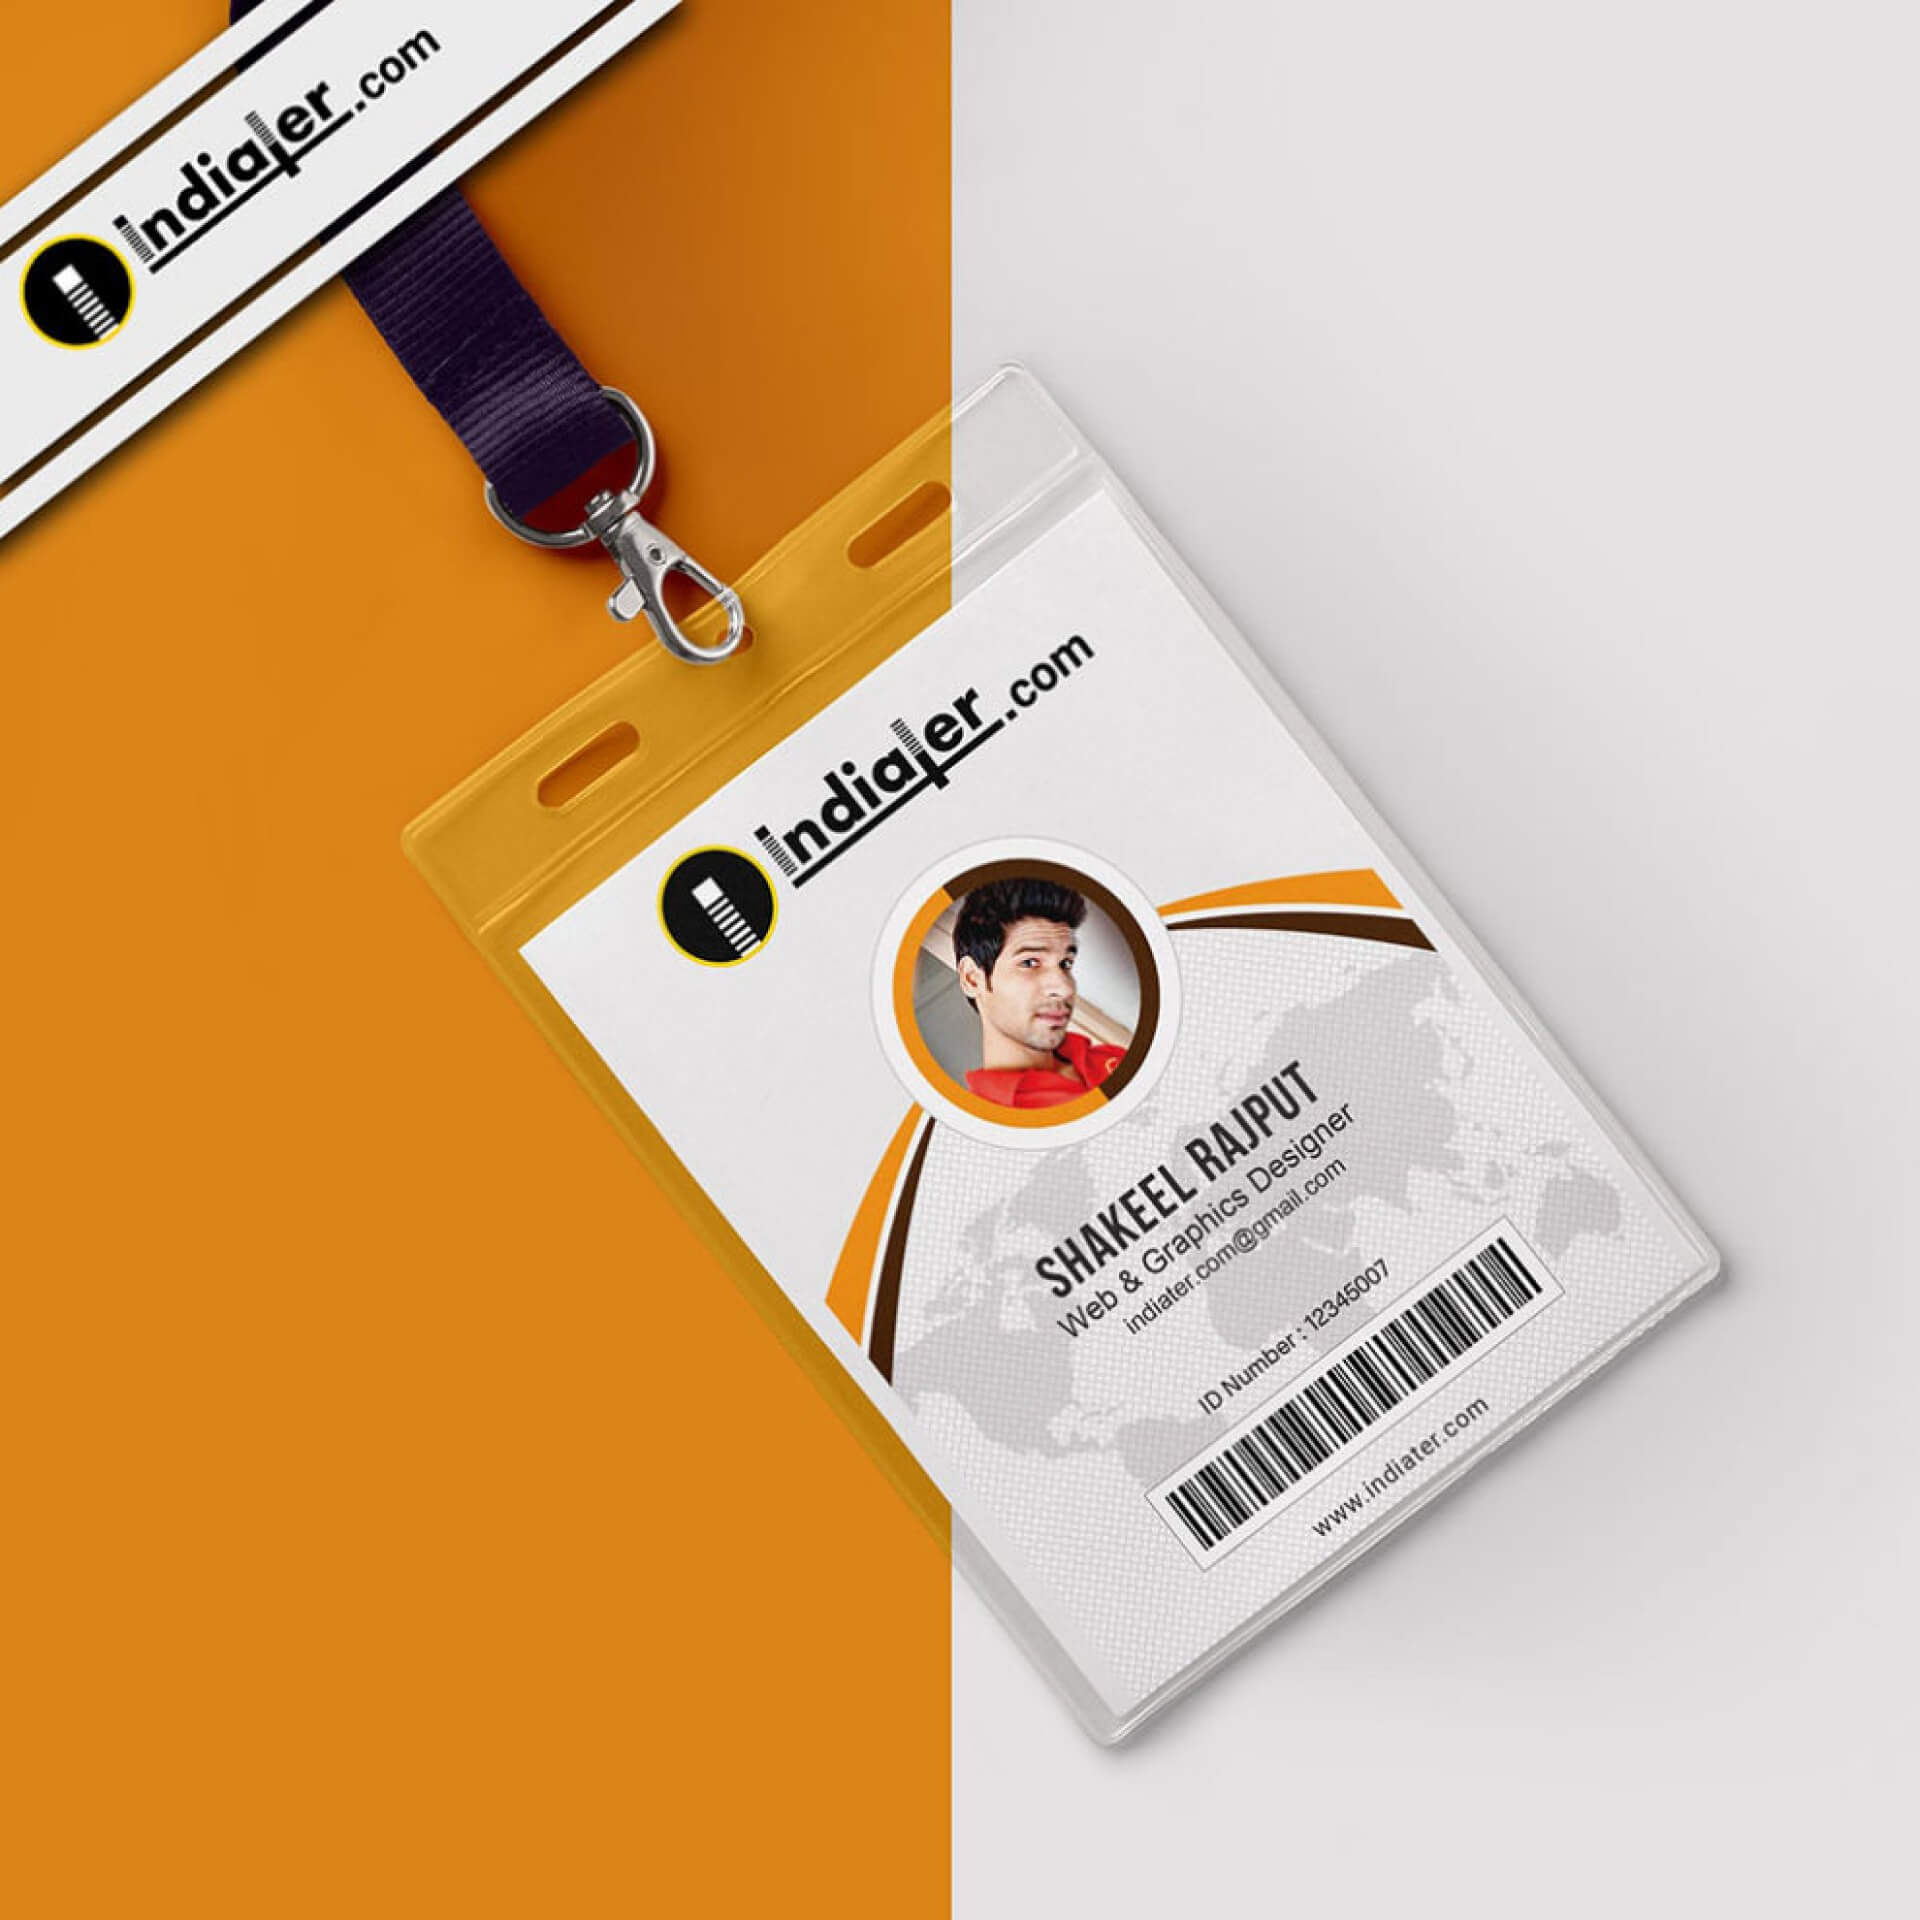 012 Id Card Template Psd Free Download Ideas Best Office With Regard To College Id Card Template Psd